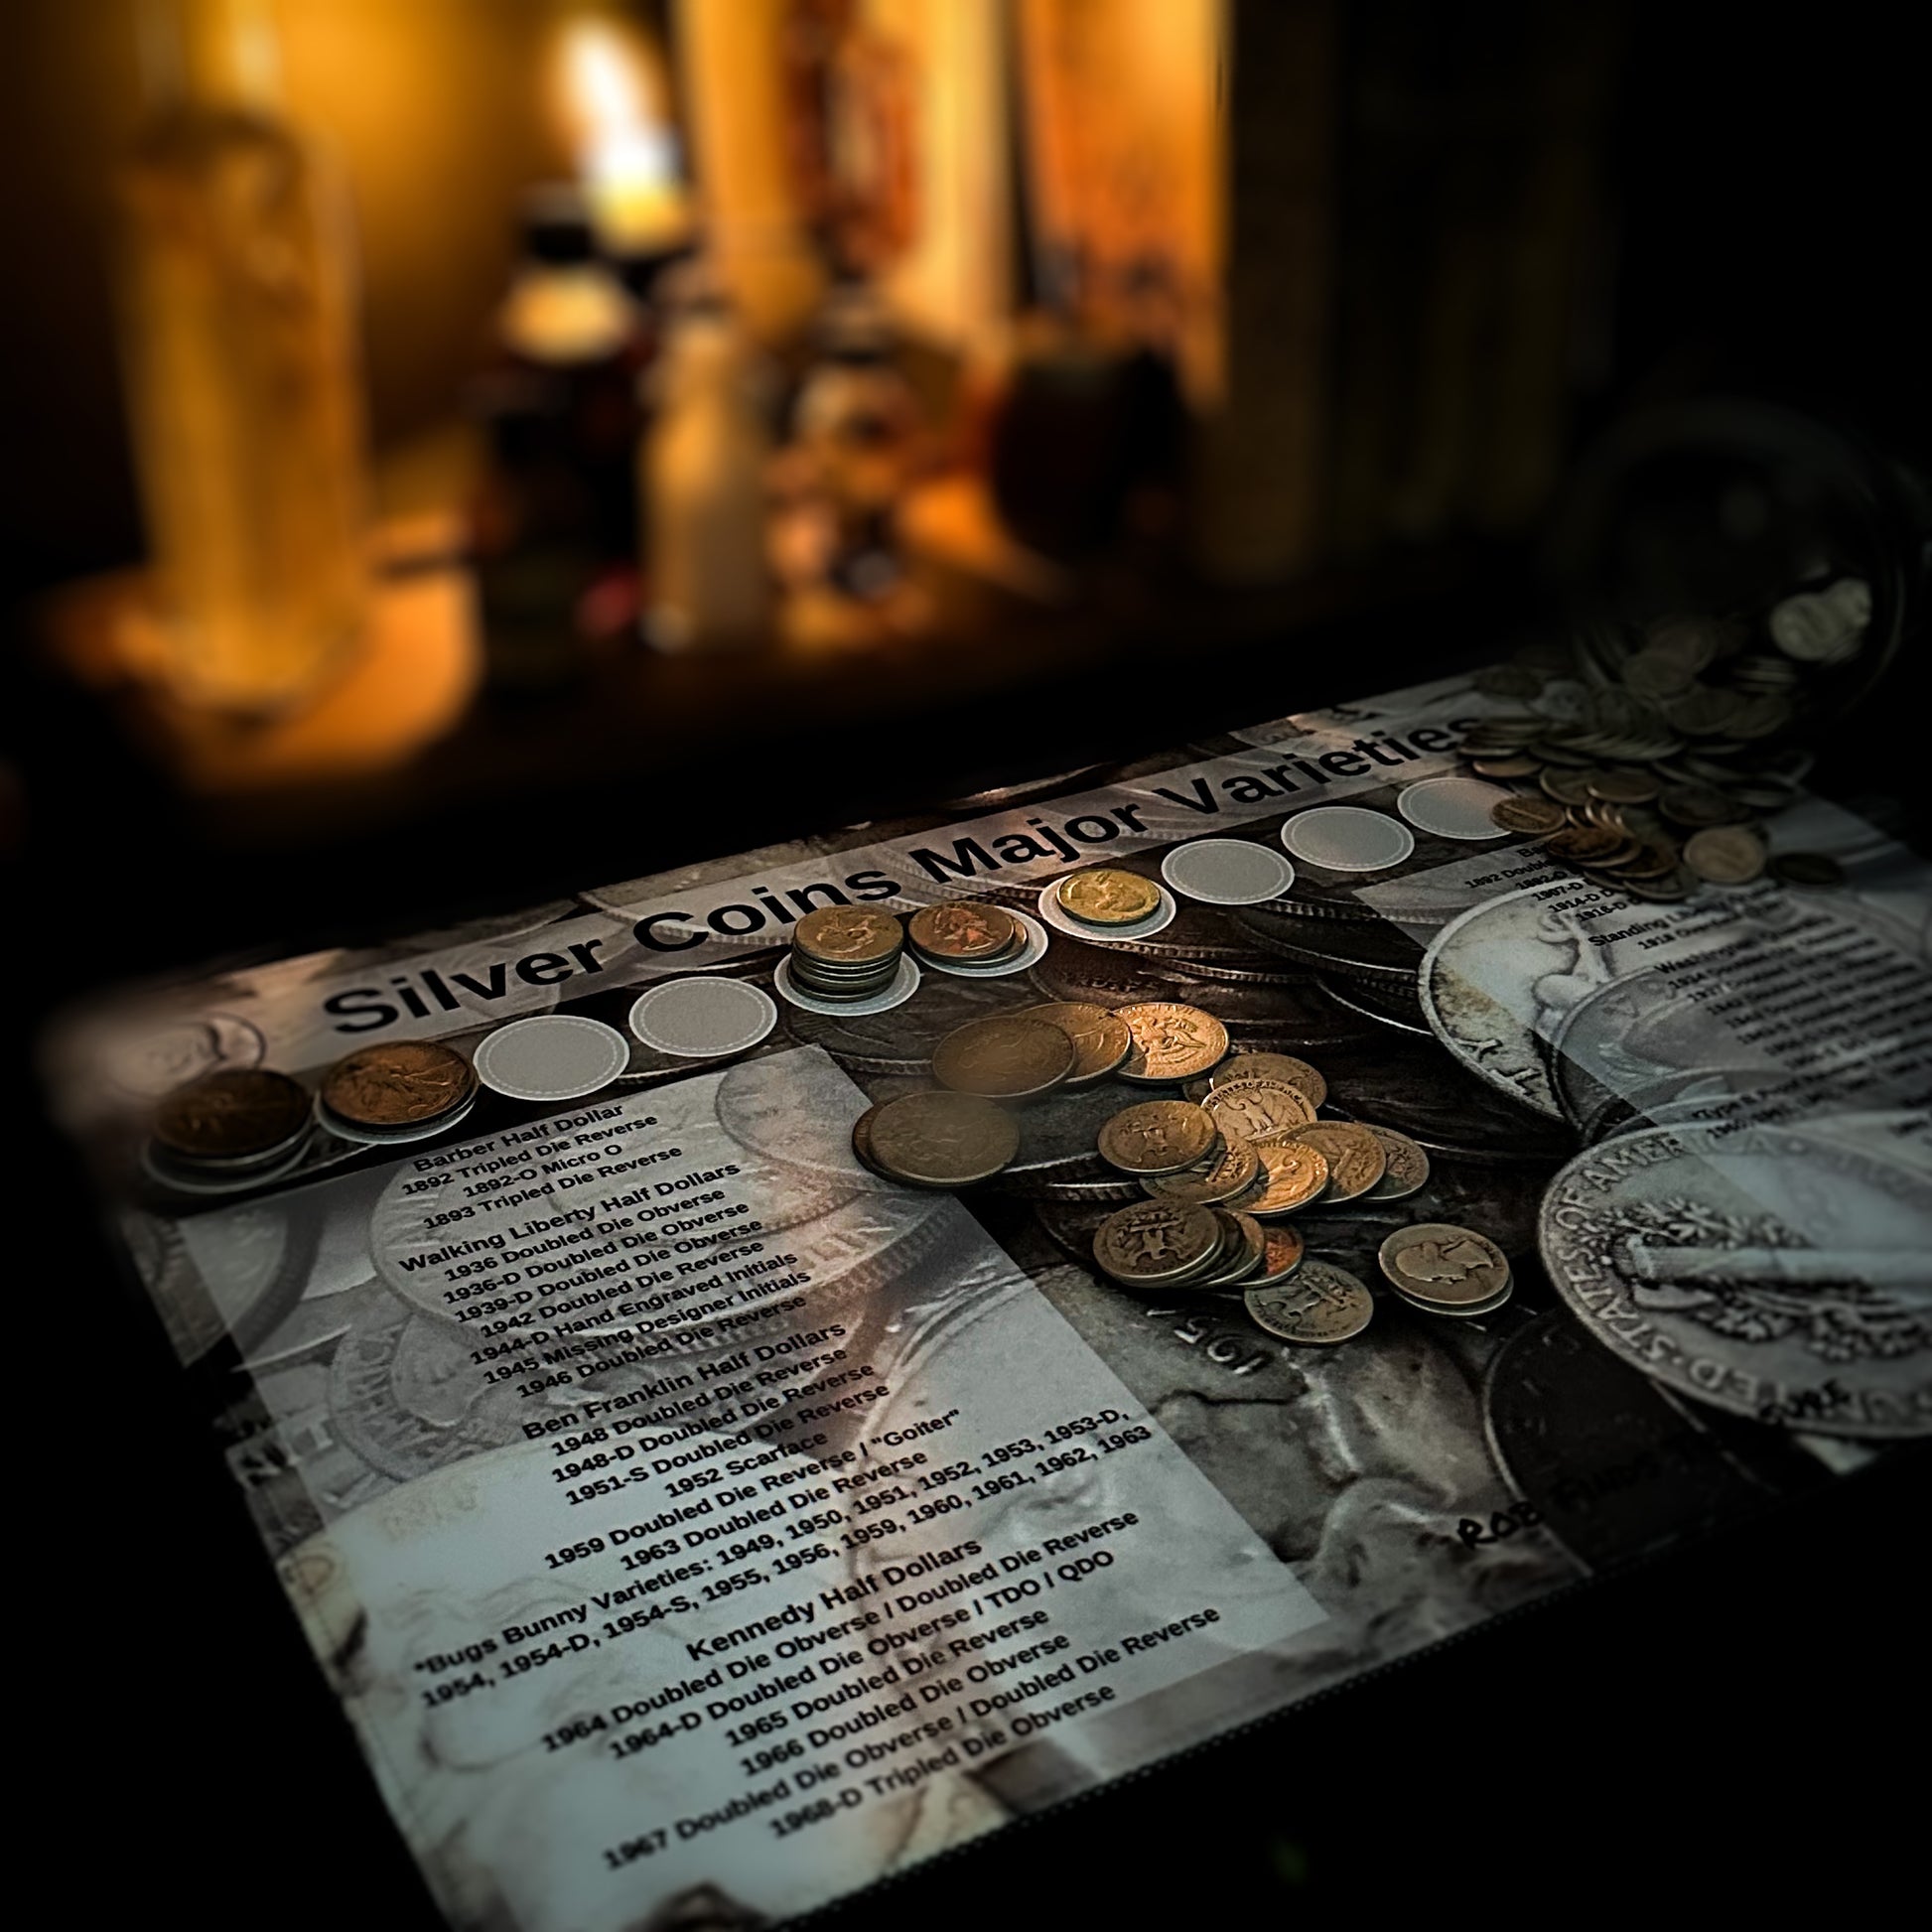 Layout with coins on a Silver Coin Hunting Mat for major Varieties made by Rob Finds Treasure featuring organized rows for stacking silver major variety finds, providing a convenient and systematic setup for searching through coins 